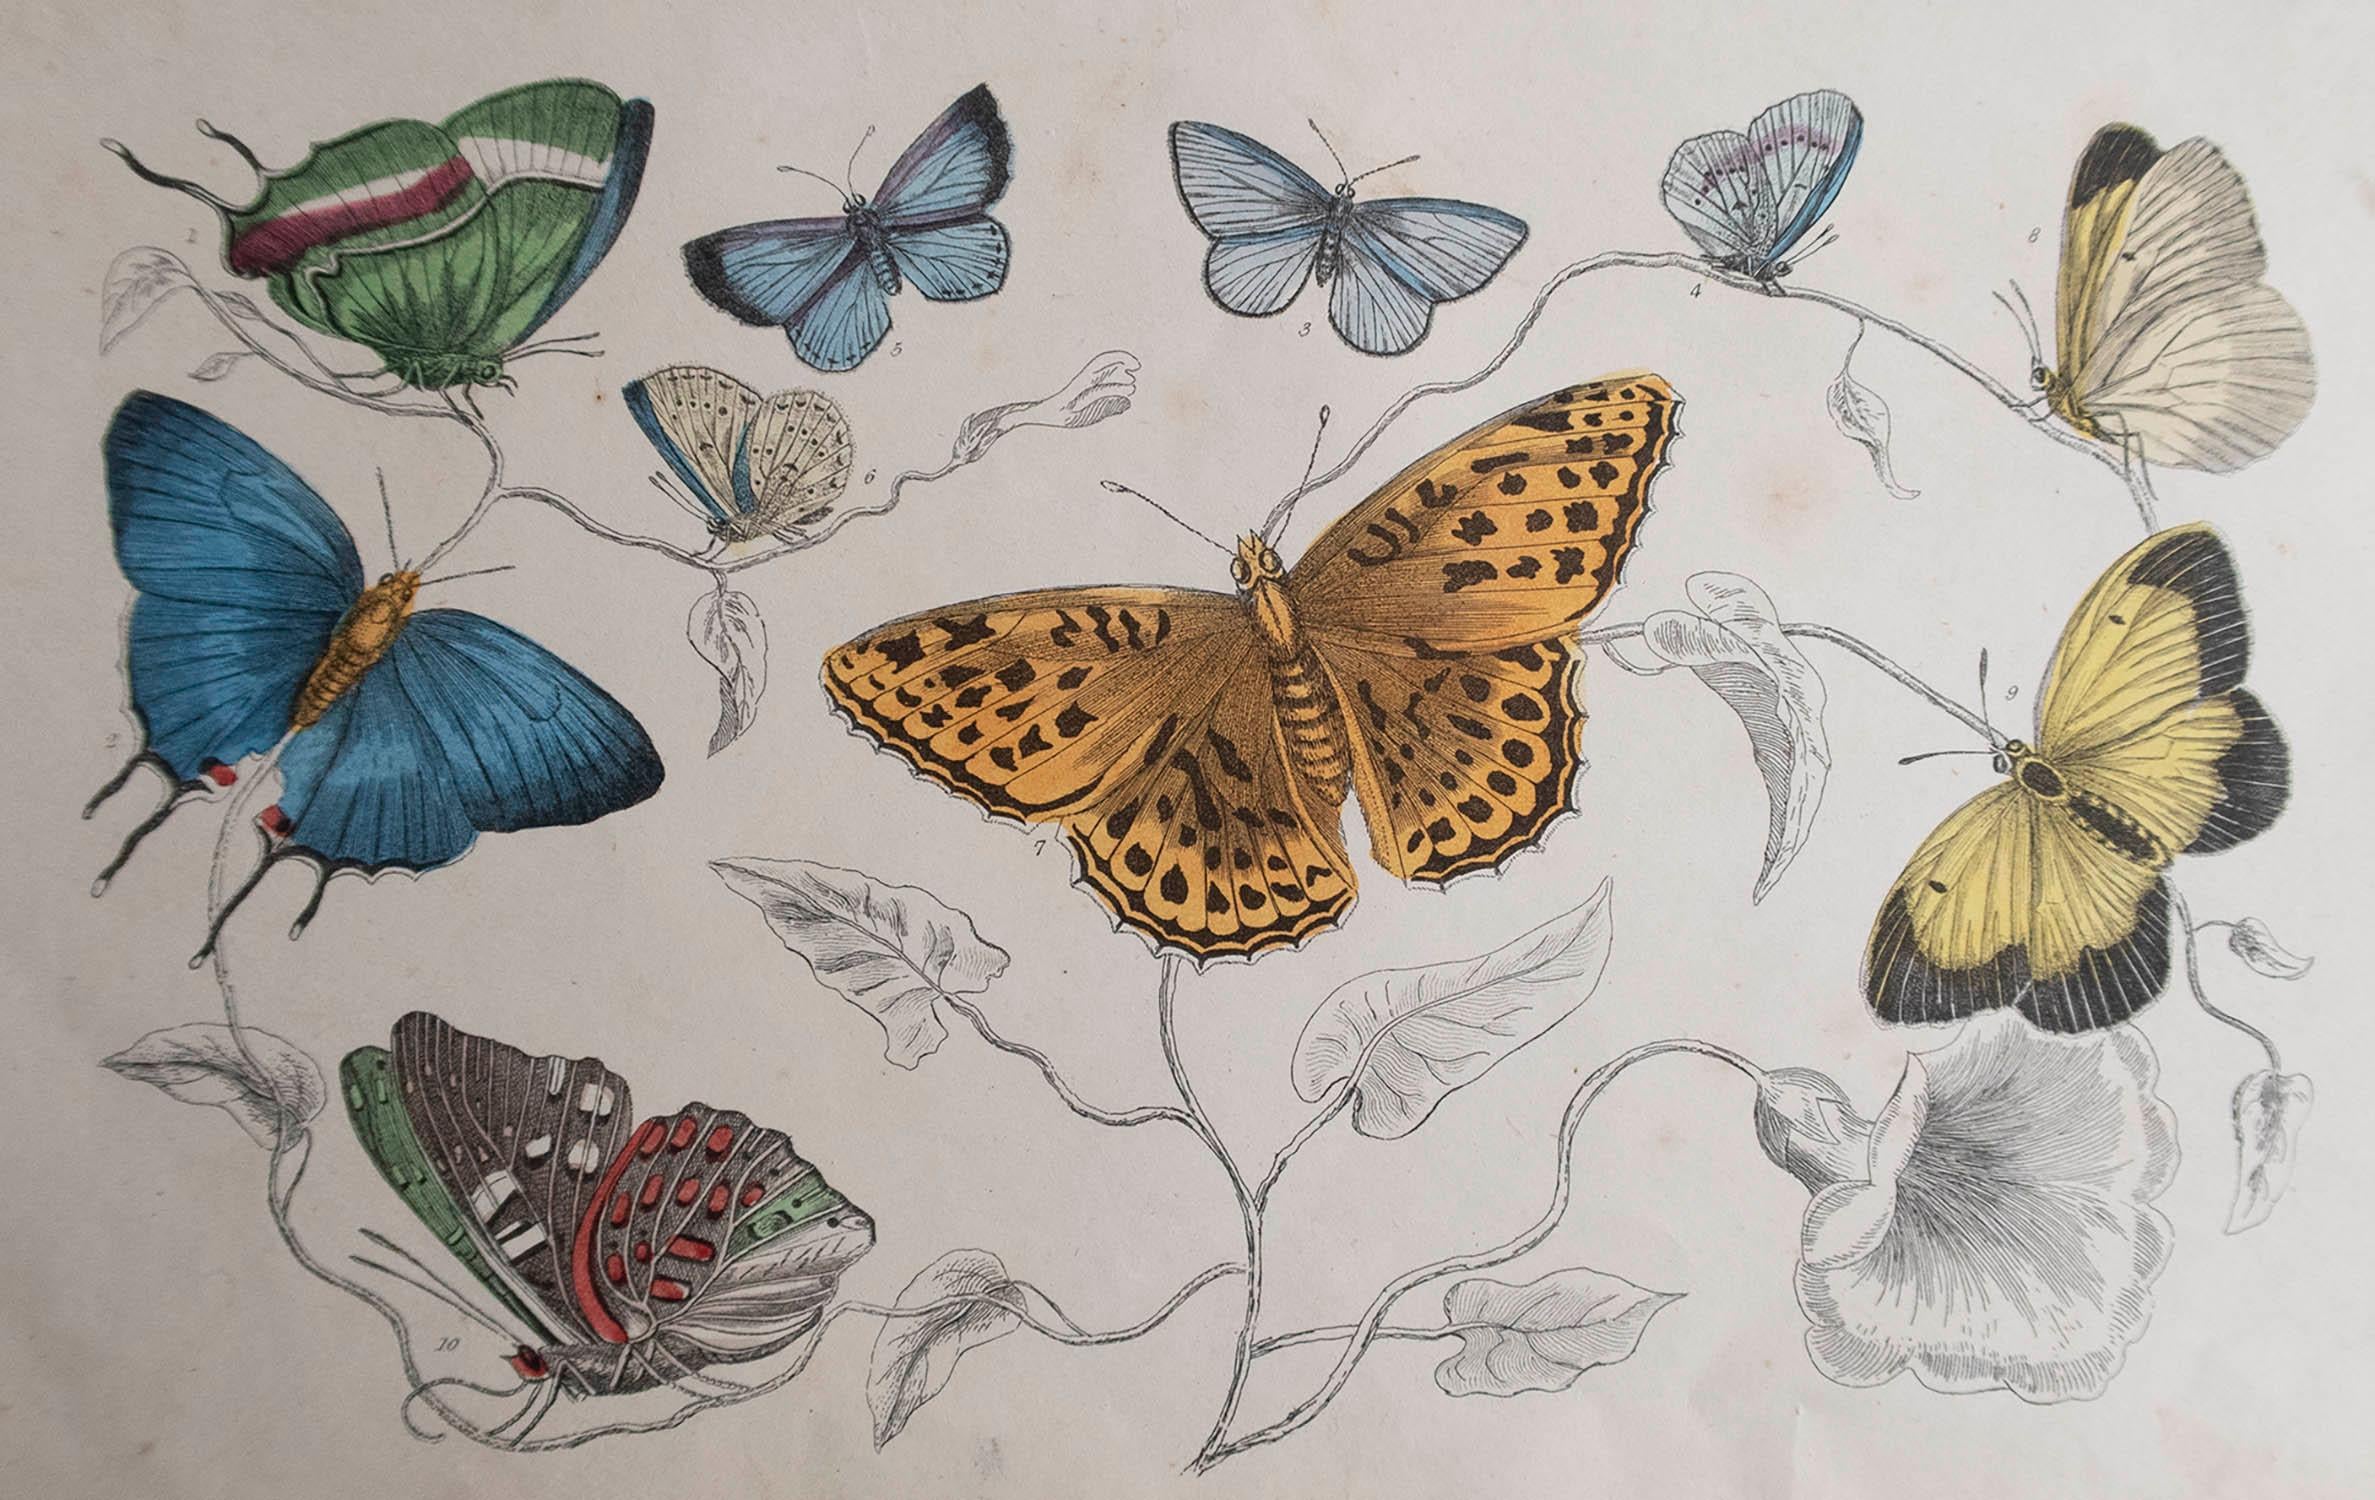 Great image of butterflies.

Unframed. It gives you the option of perhaps making a set up using your own choice of frames.

Lithograph after Cpt. brown with original hand color.

Published, 1847.